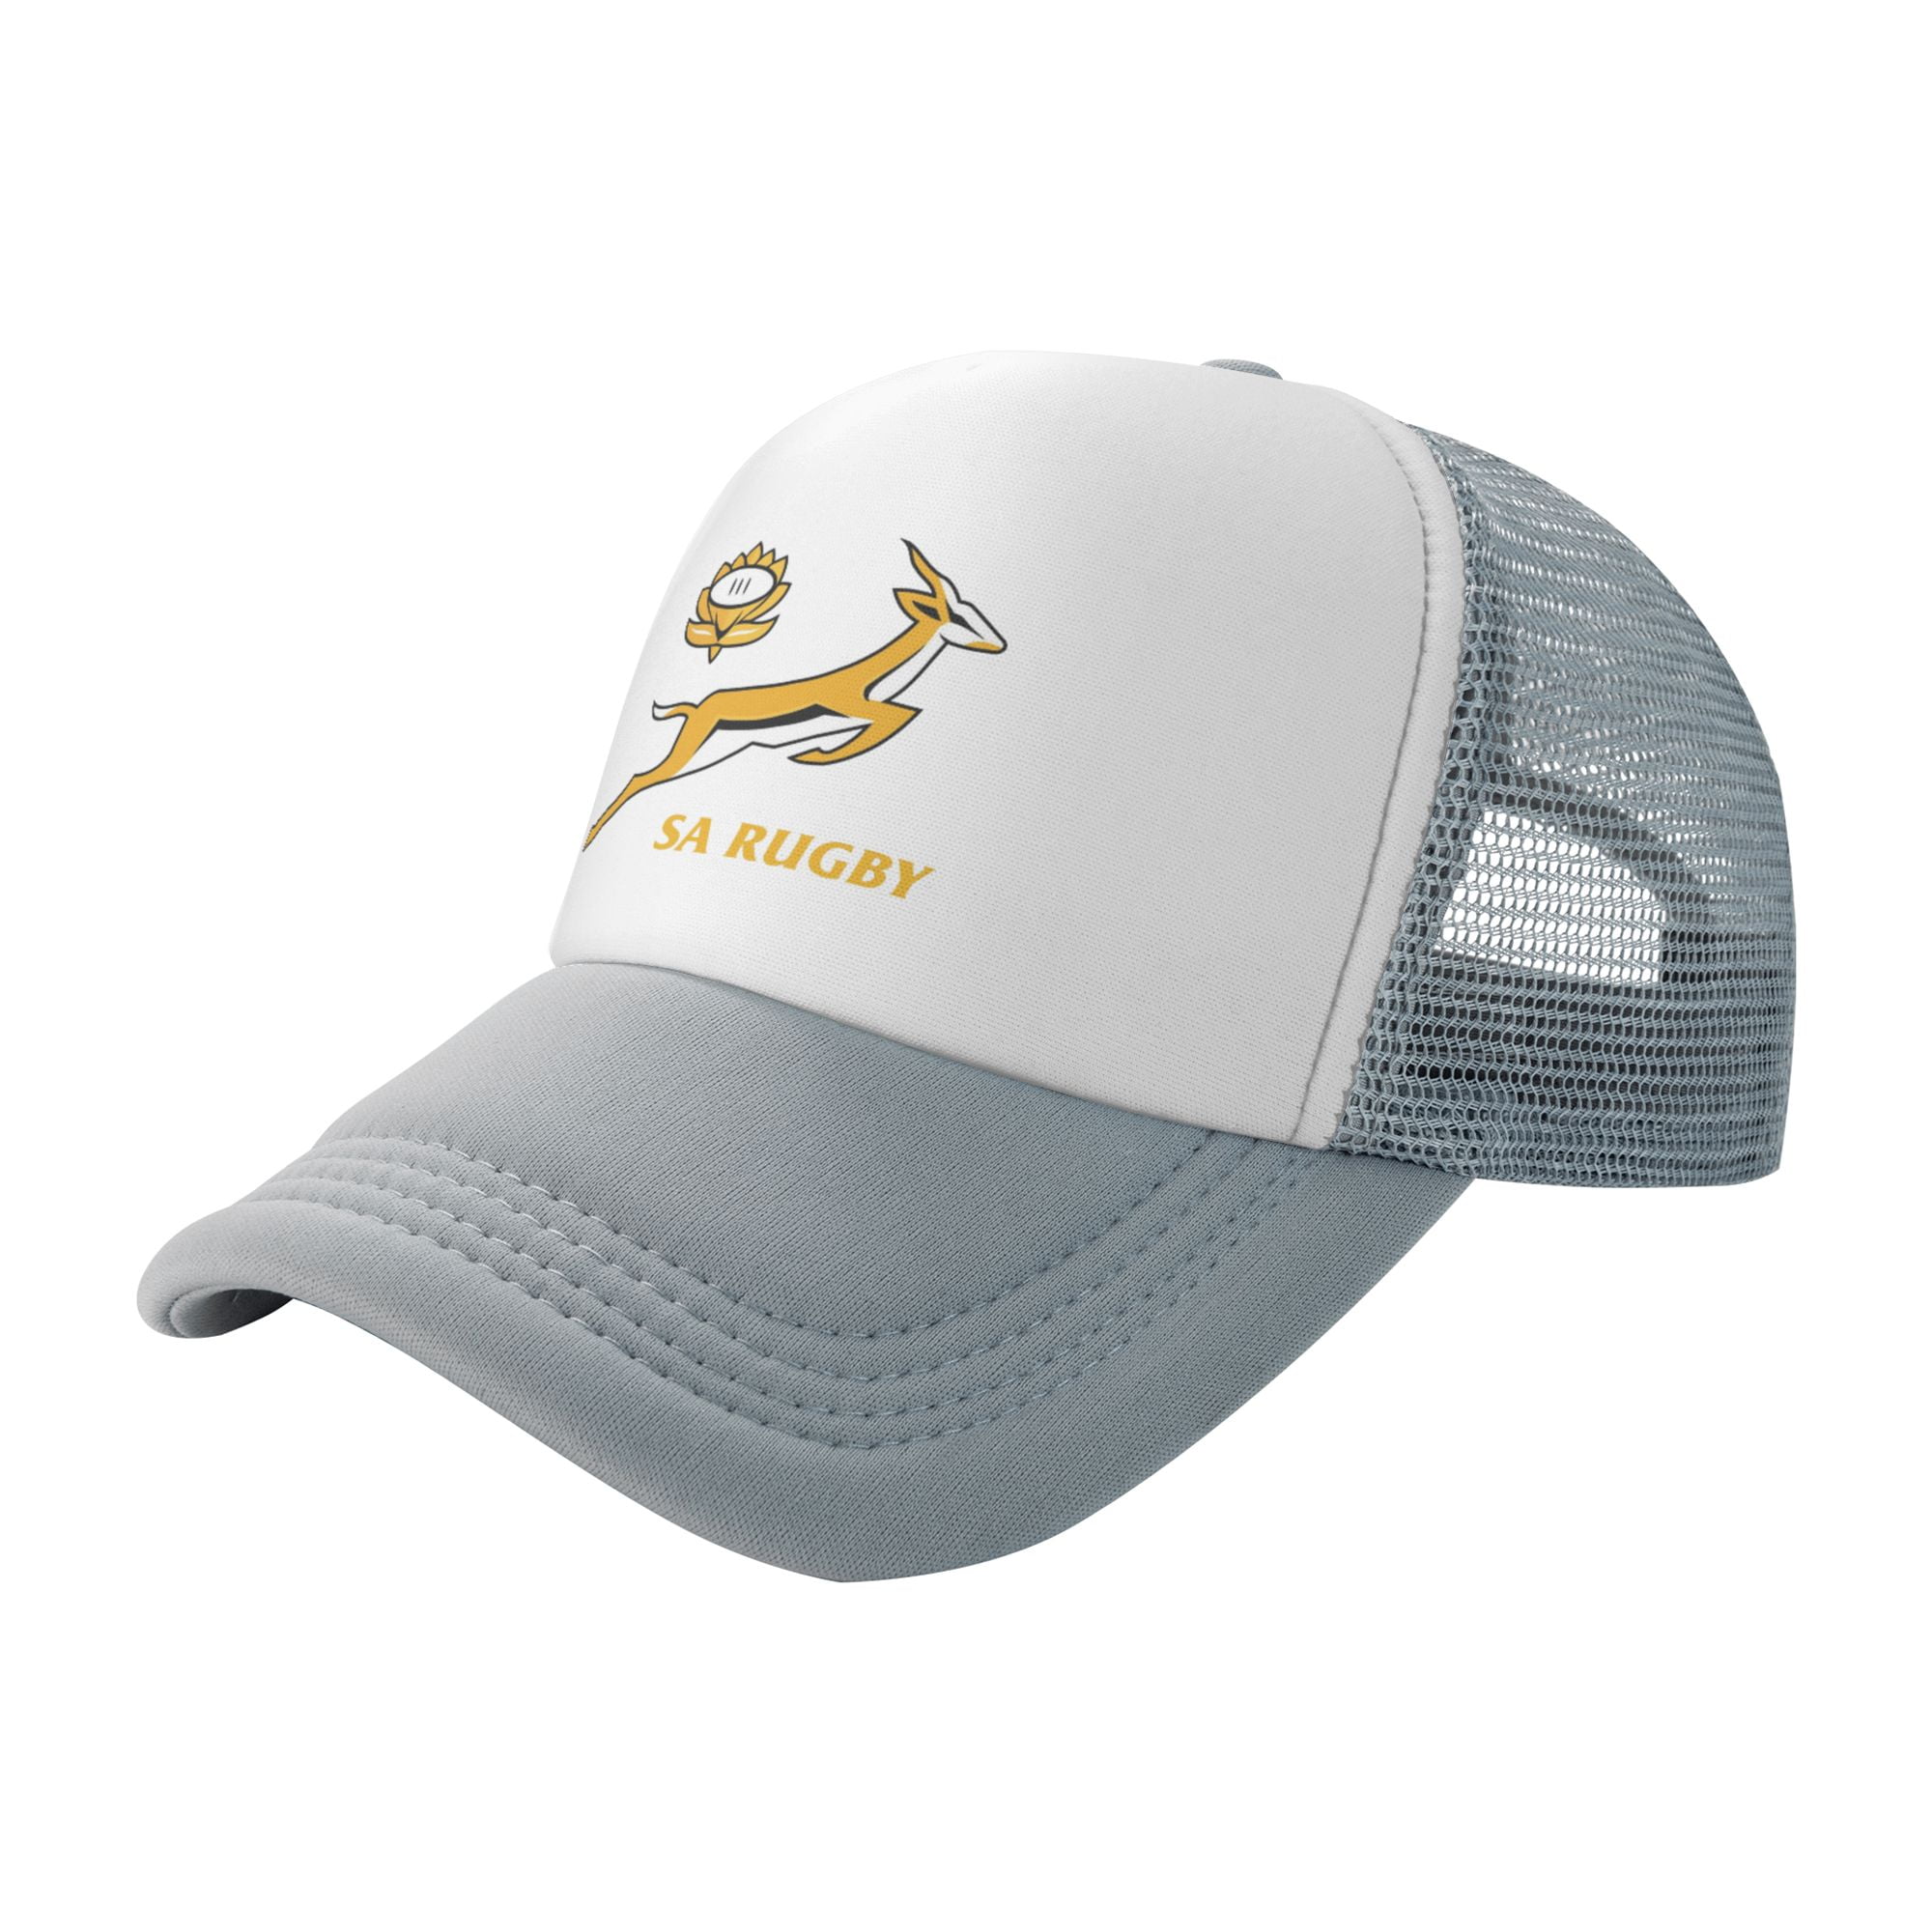 Springbok Rugby South Africa Trucker Hats Gray One Size Adjustable Snapback Hat